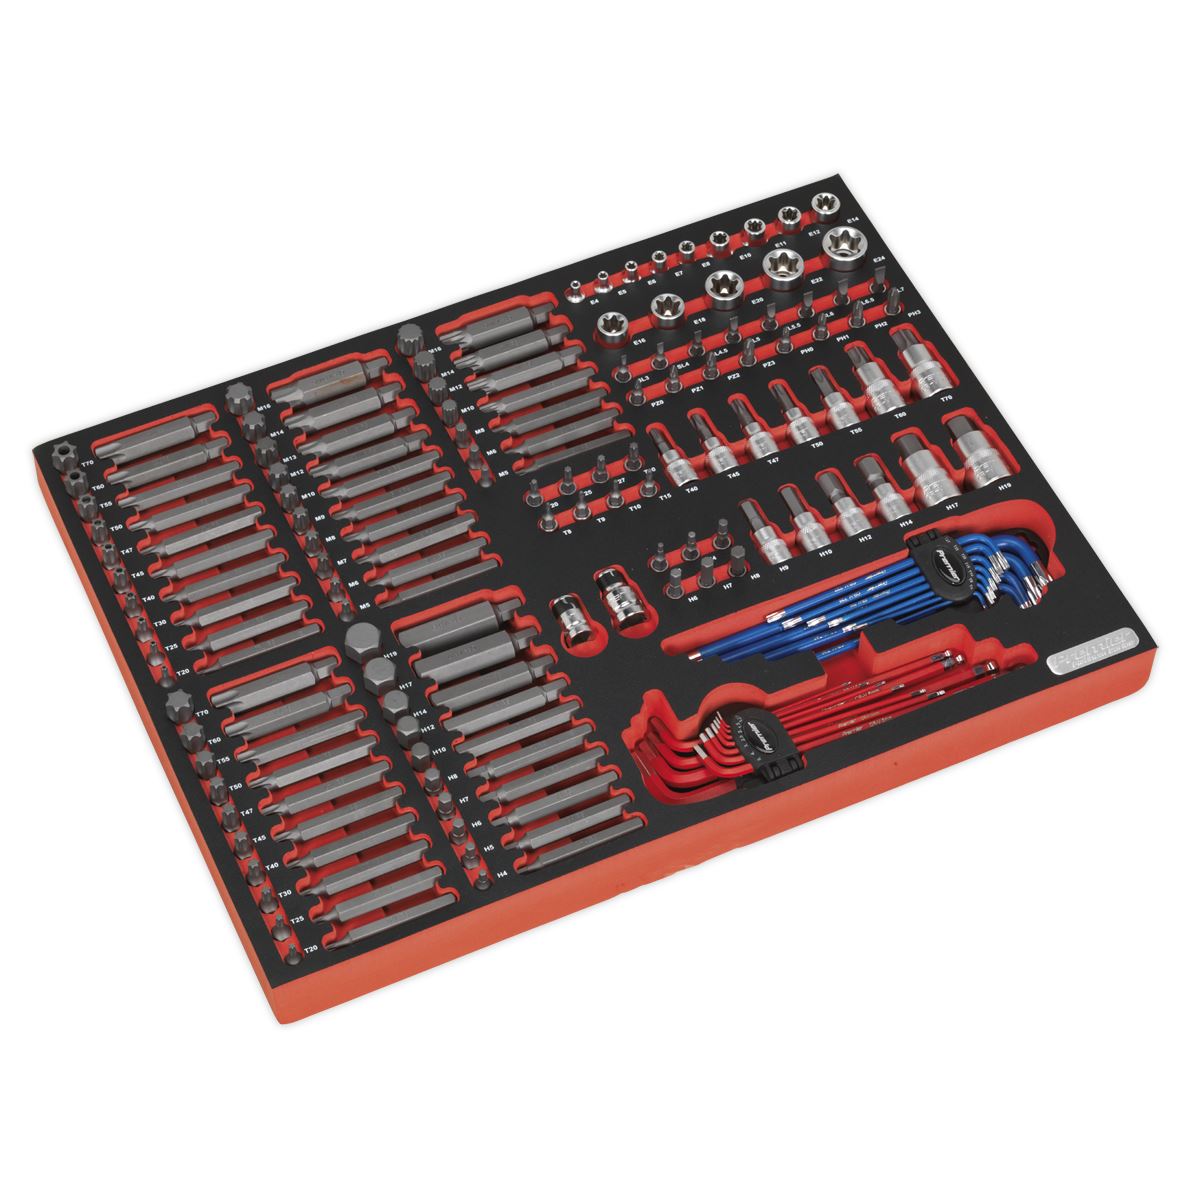 Sealey Premier Platinum Tool Tray with Specialised Bits & Sockets 177pc